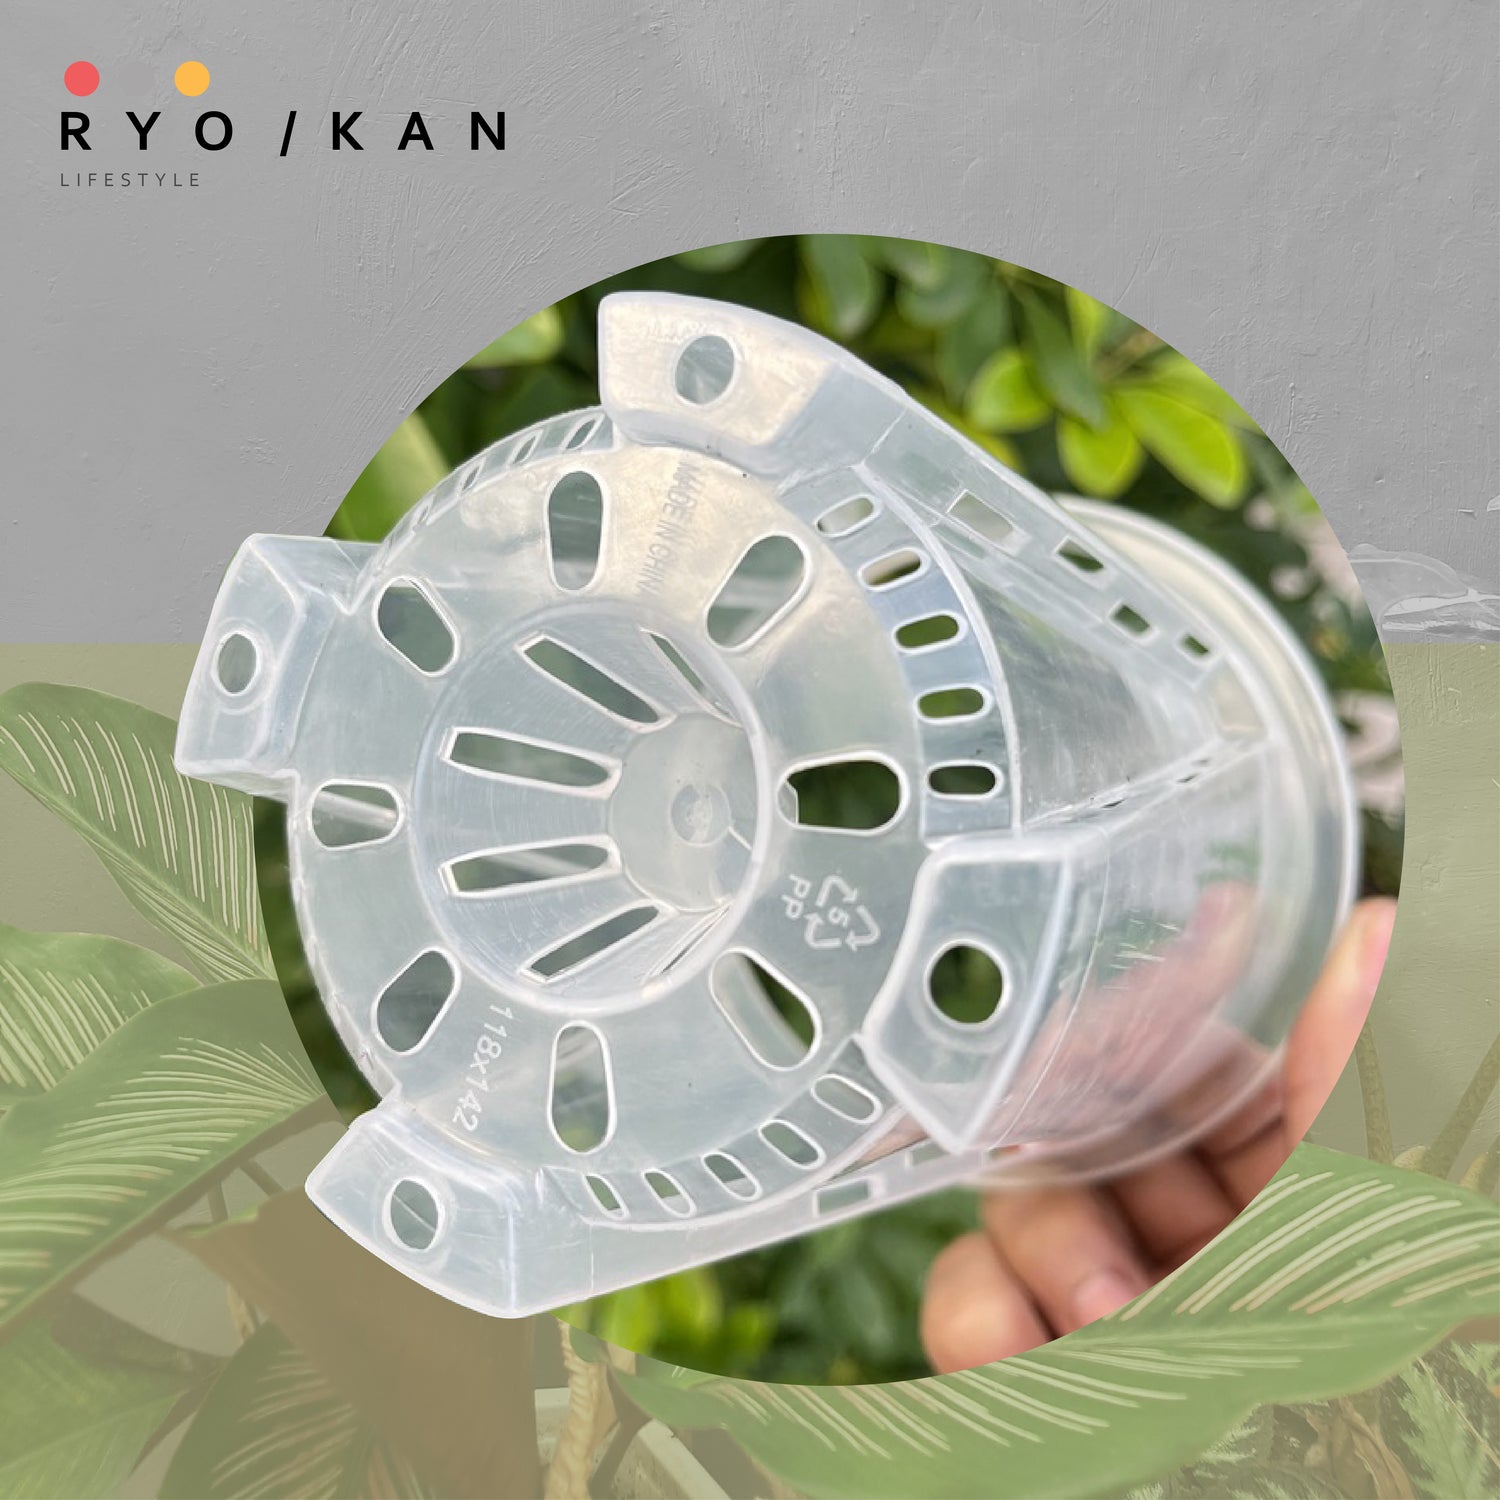 [Ryokan] Transparent Pruning Pots - Set of 3 Value Pack.  Maximize airflow and drainage to promote root development. Durable thickened contruction & UV resistant material - Bloom Concept